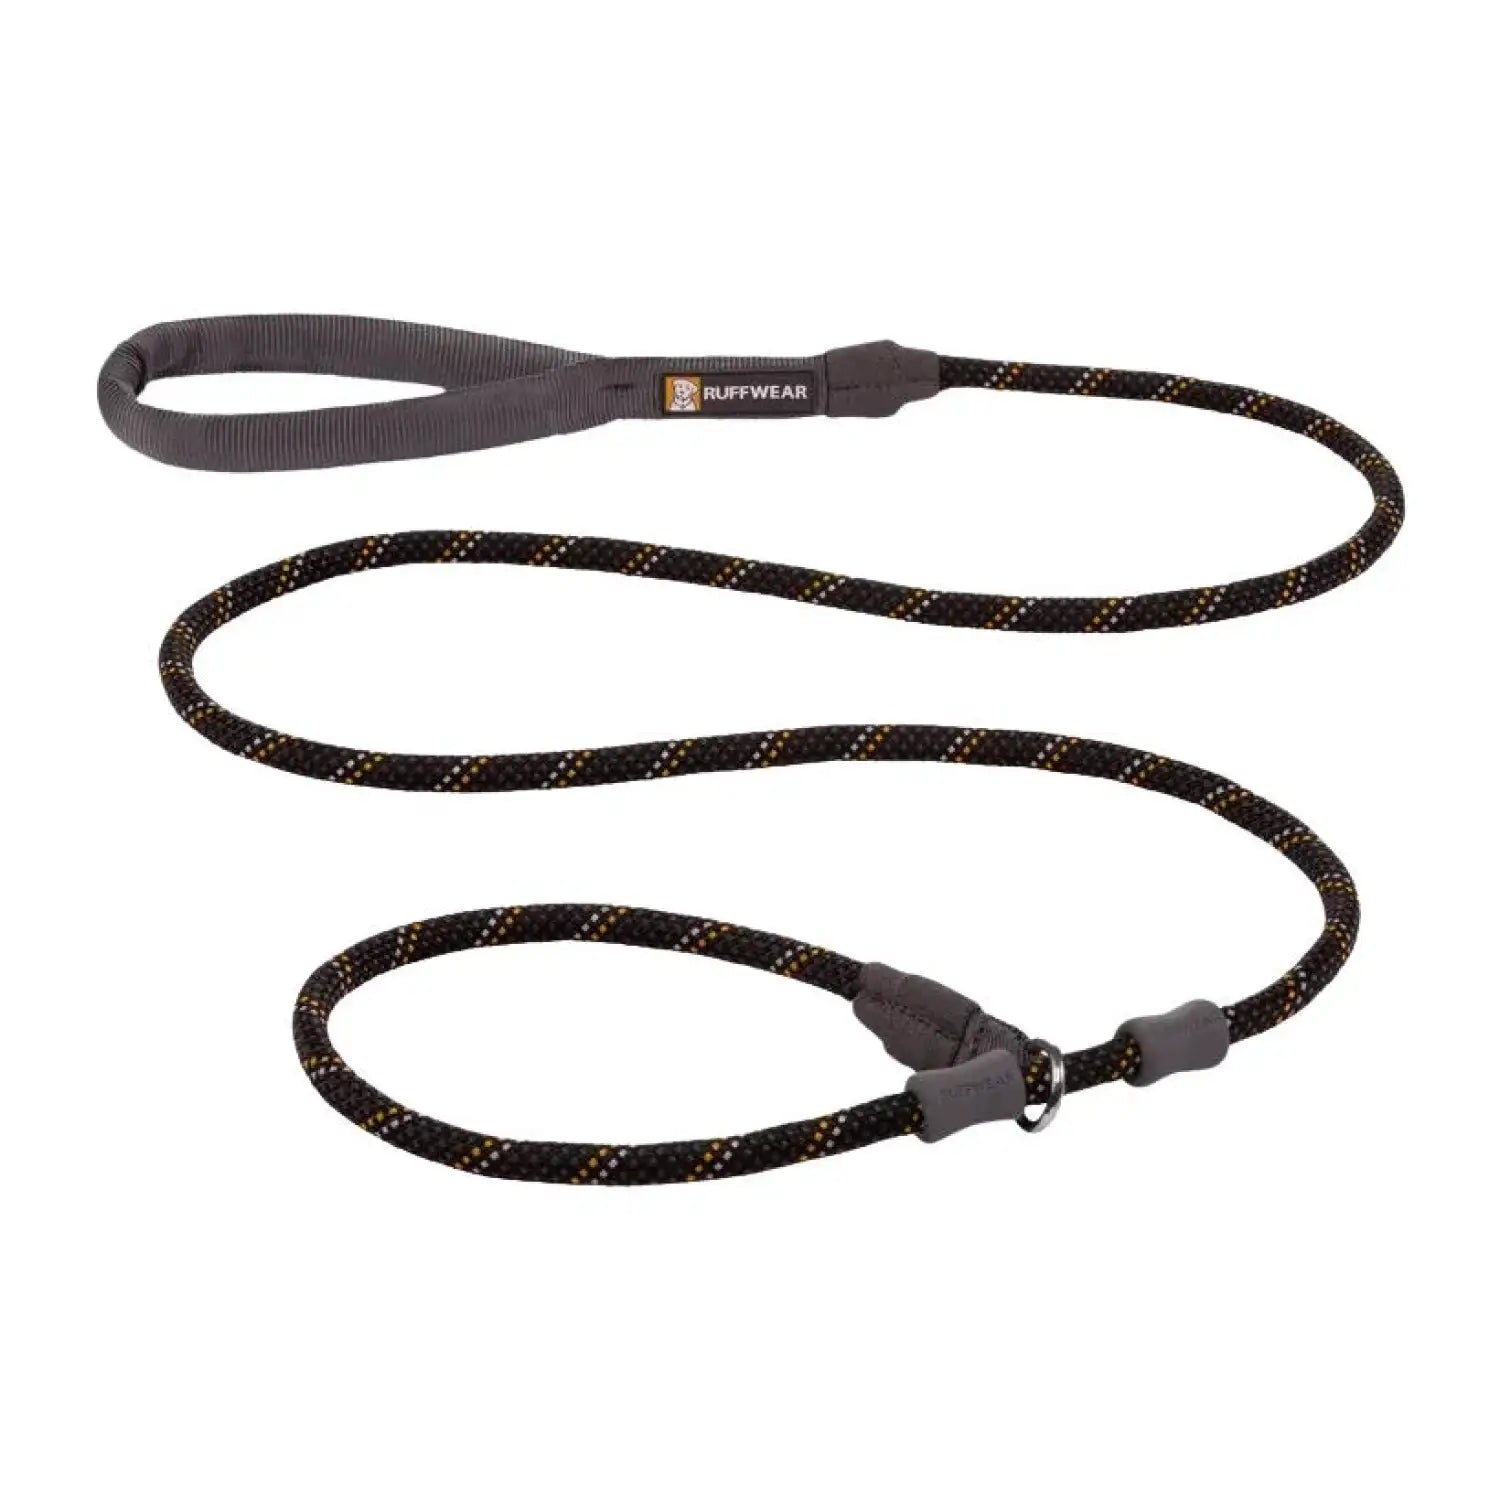 Ruff Wear Just-a-Cinch™ Dog Leash shown in the Obsidian Black color option. Full Length. 